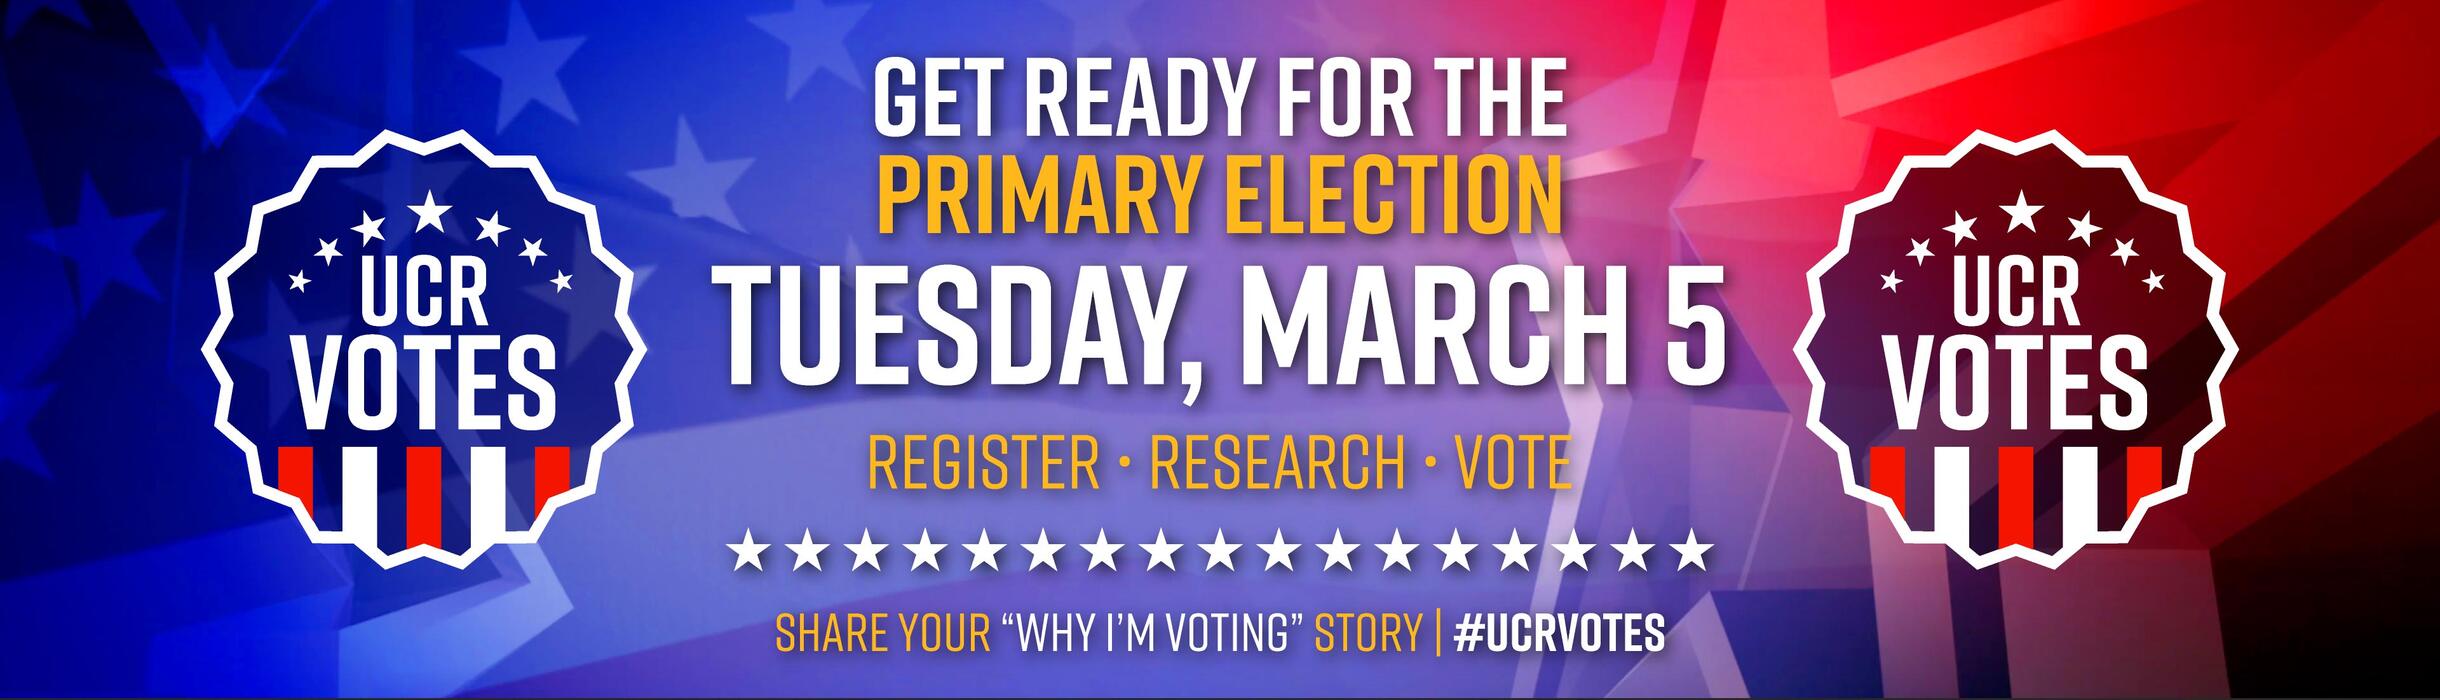 GET READY FOR THE Primary Election Tuesday, March 5 | REGISTER • RESEARCH • VOTE | SHARE YOUR “WHY I’M VOTING” STORY | #UCRVOTES